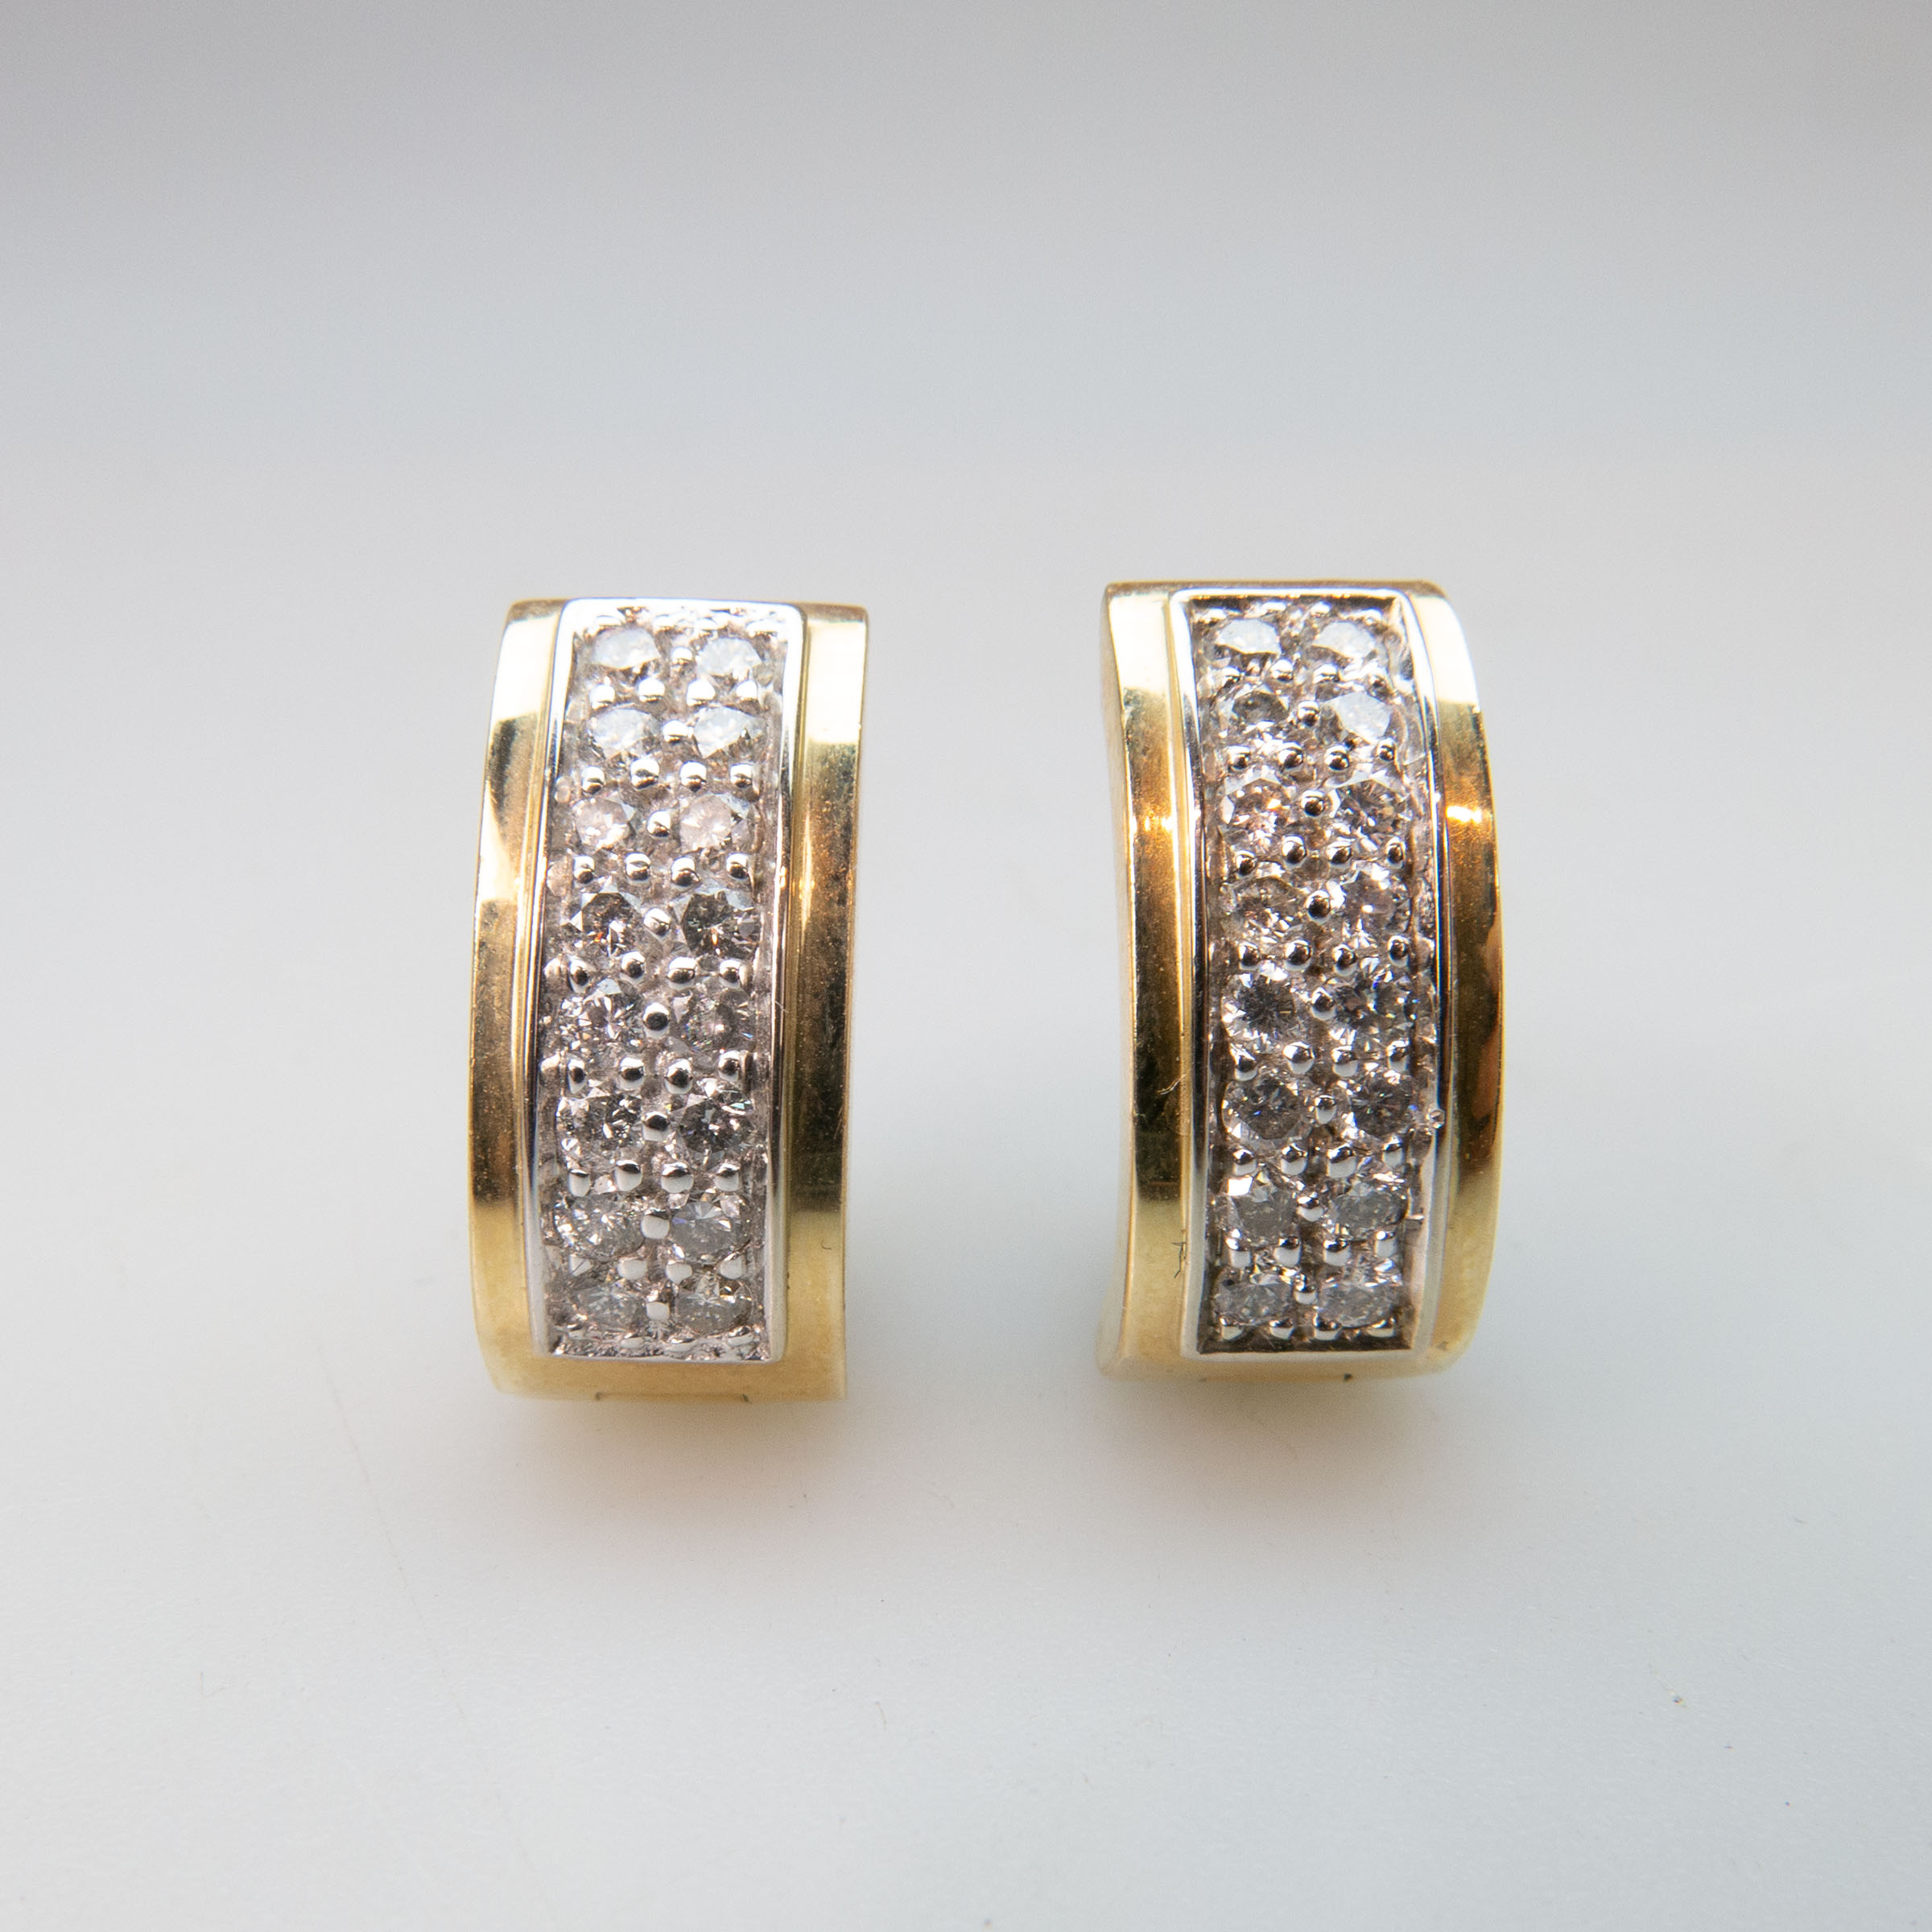 Pair Of 14k Yellow Gold 'Huggy' Style Earrings